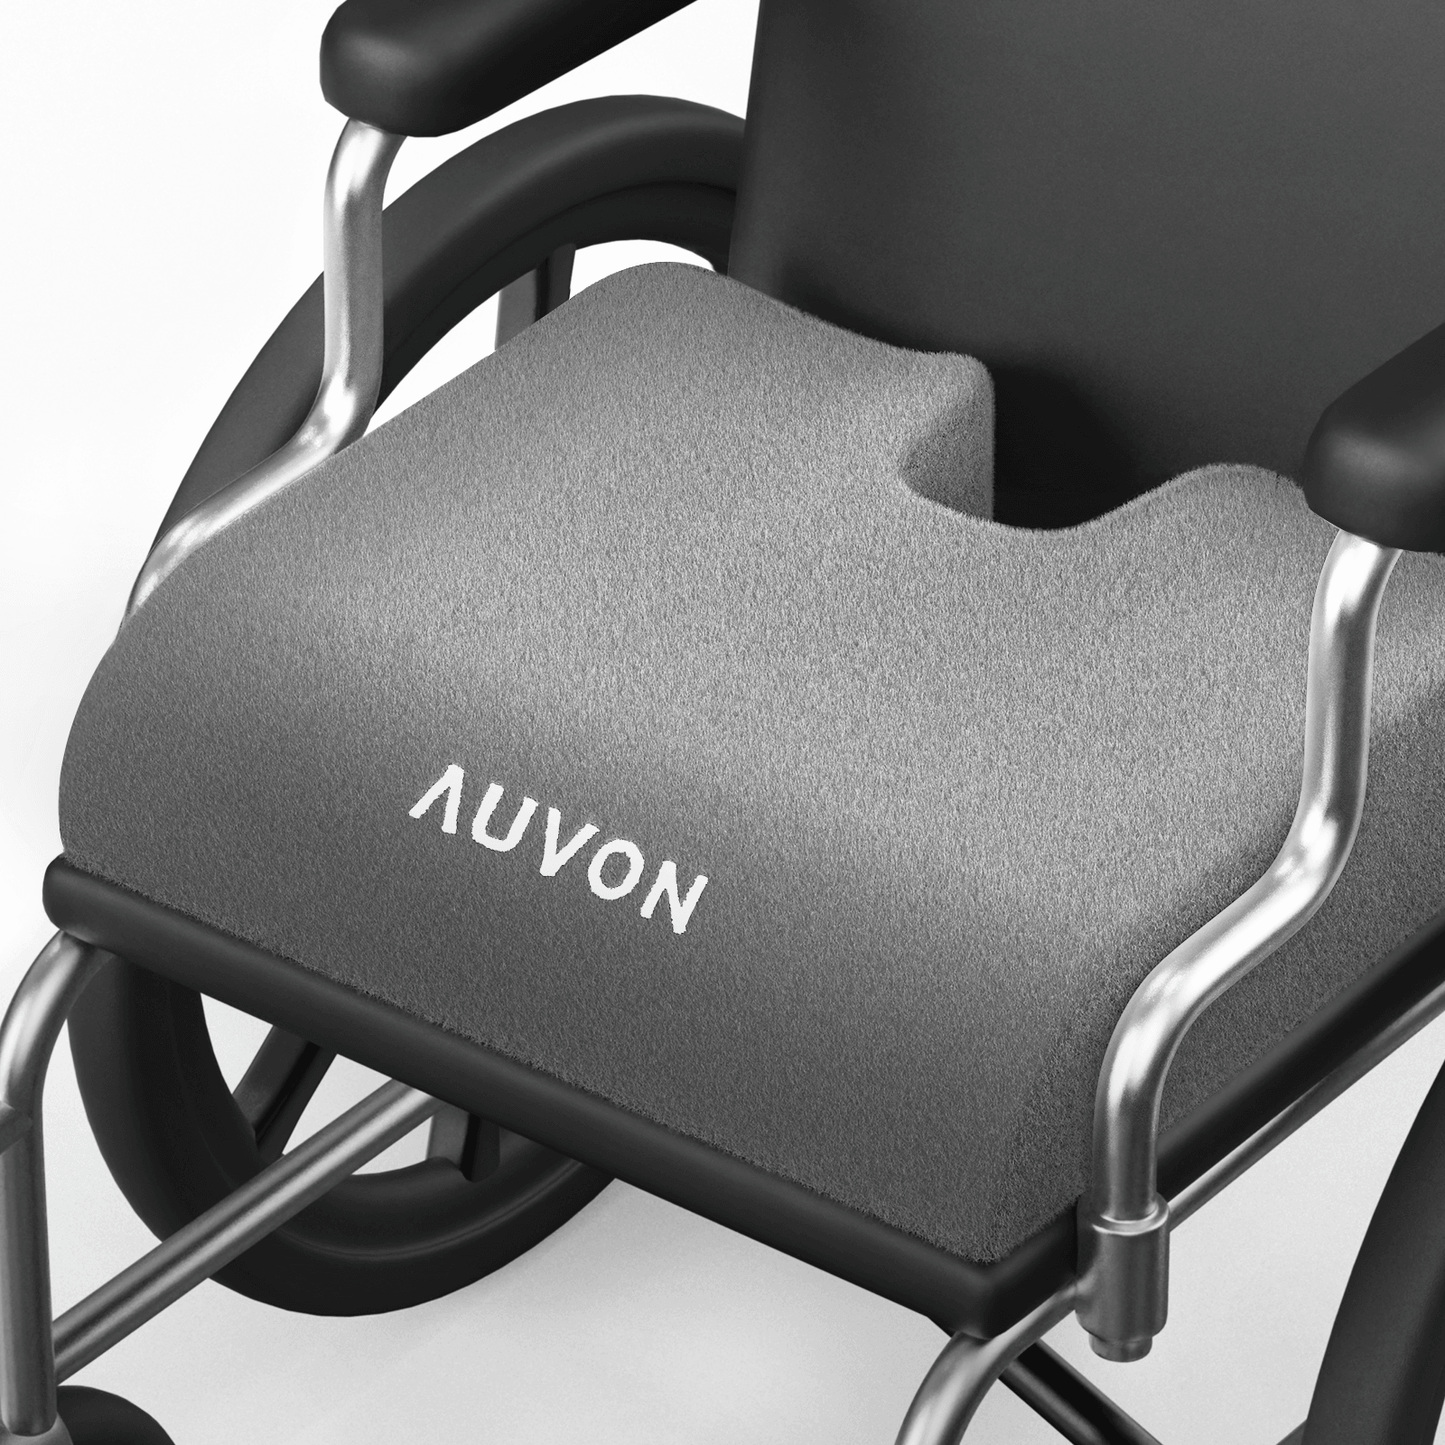 AUVON Gel Wheelchair Seat Cushion, Relieve Sciatica, Back, Coccyx, Pressure  Sore and Ulcer Pain, Refreshing & Ergonomic Chair Cushion with Waterproof